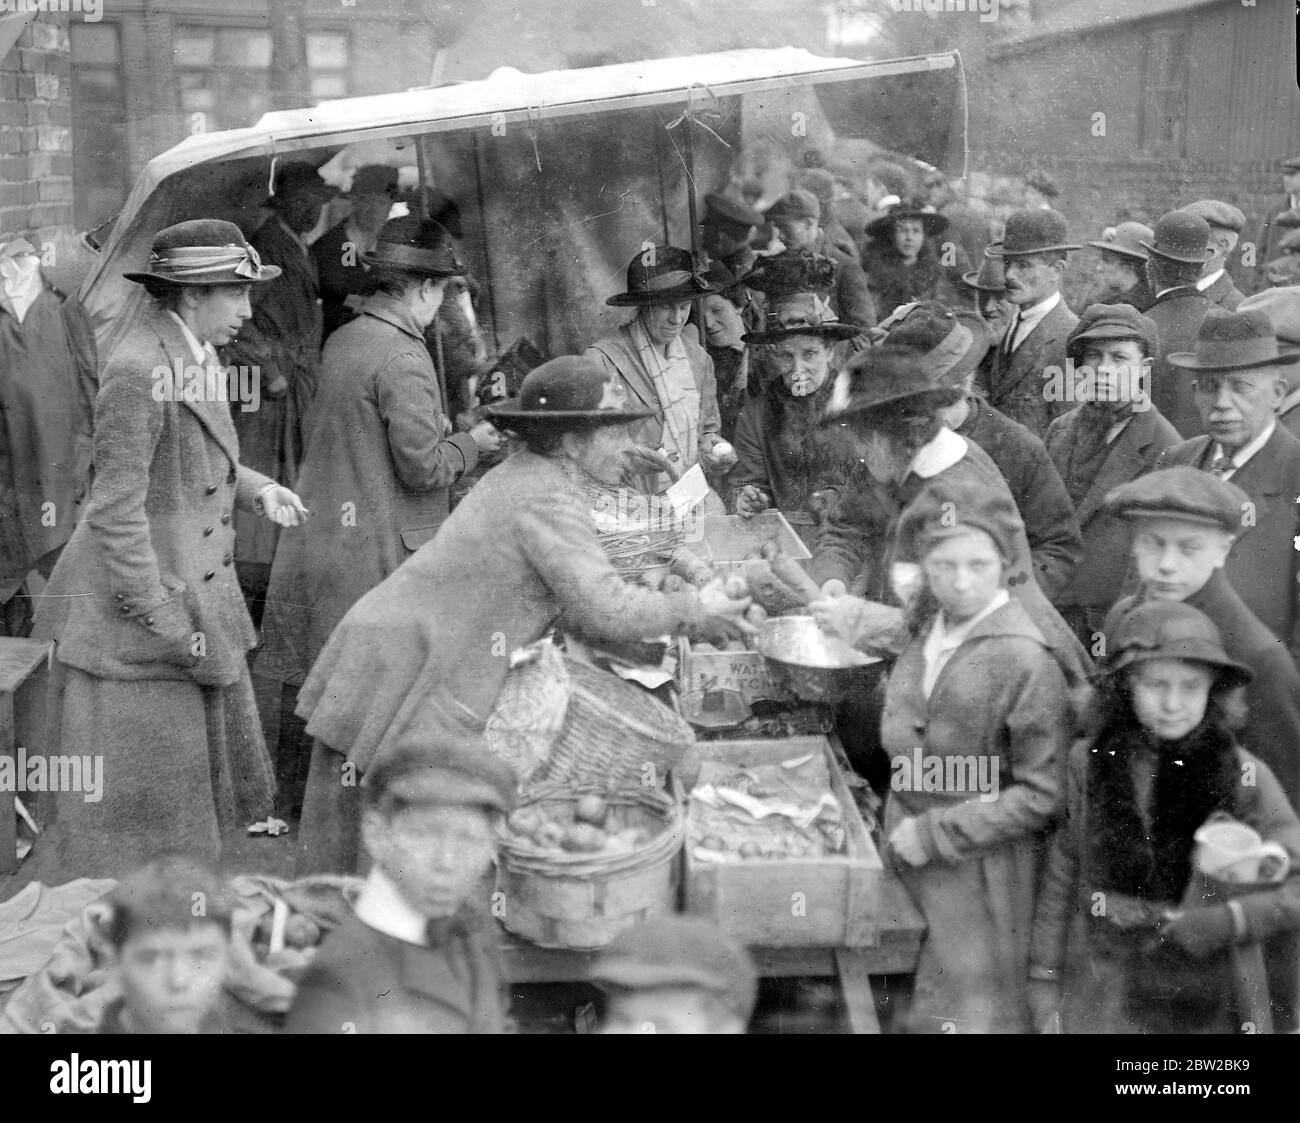 Lady Petre has opened a stall in Chelmsford Market to bring more produce into the town during the scarcity. 23rd February 1918 Stock Photo